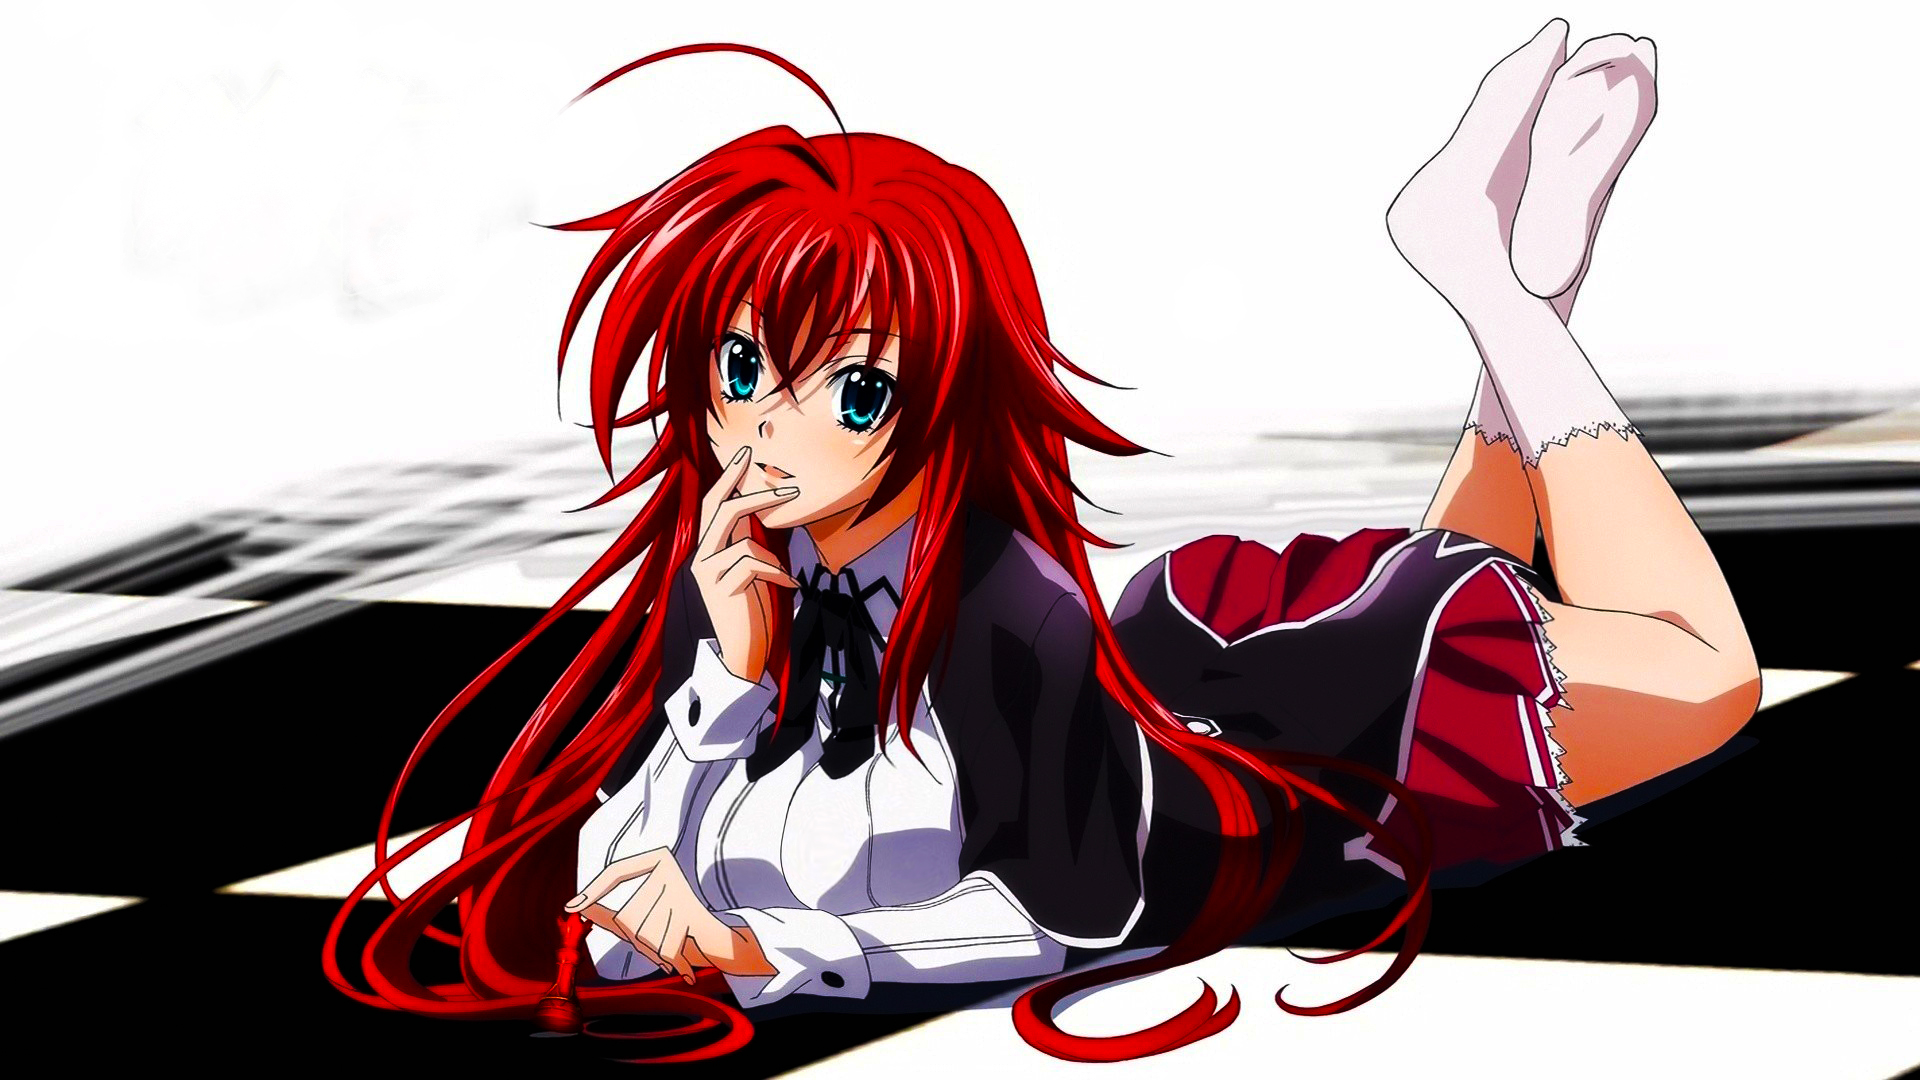 High School DxD Images. 